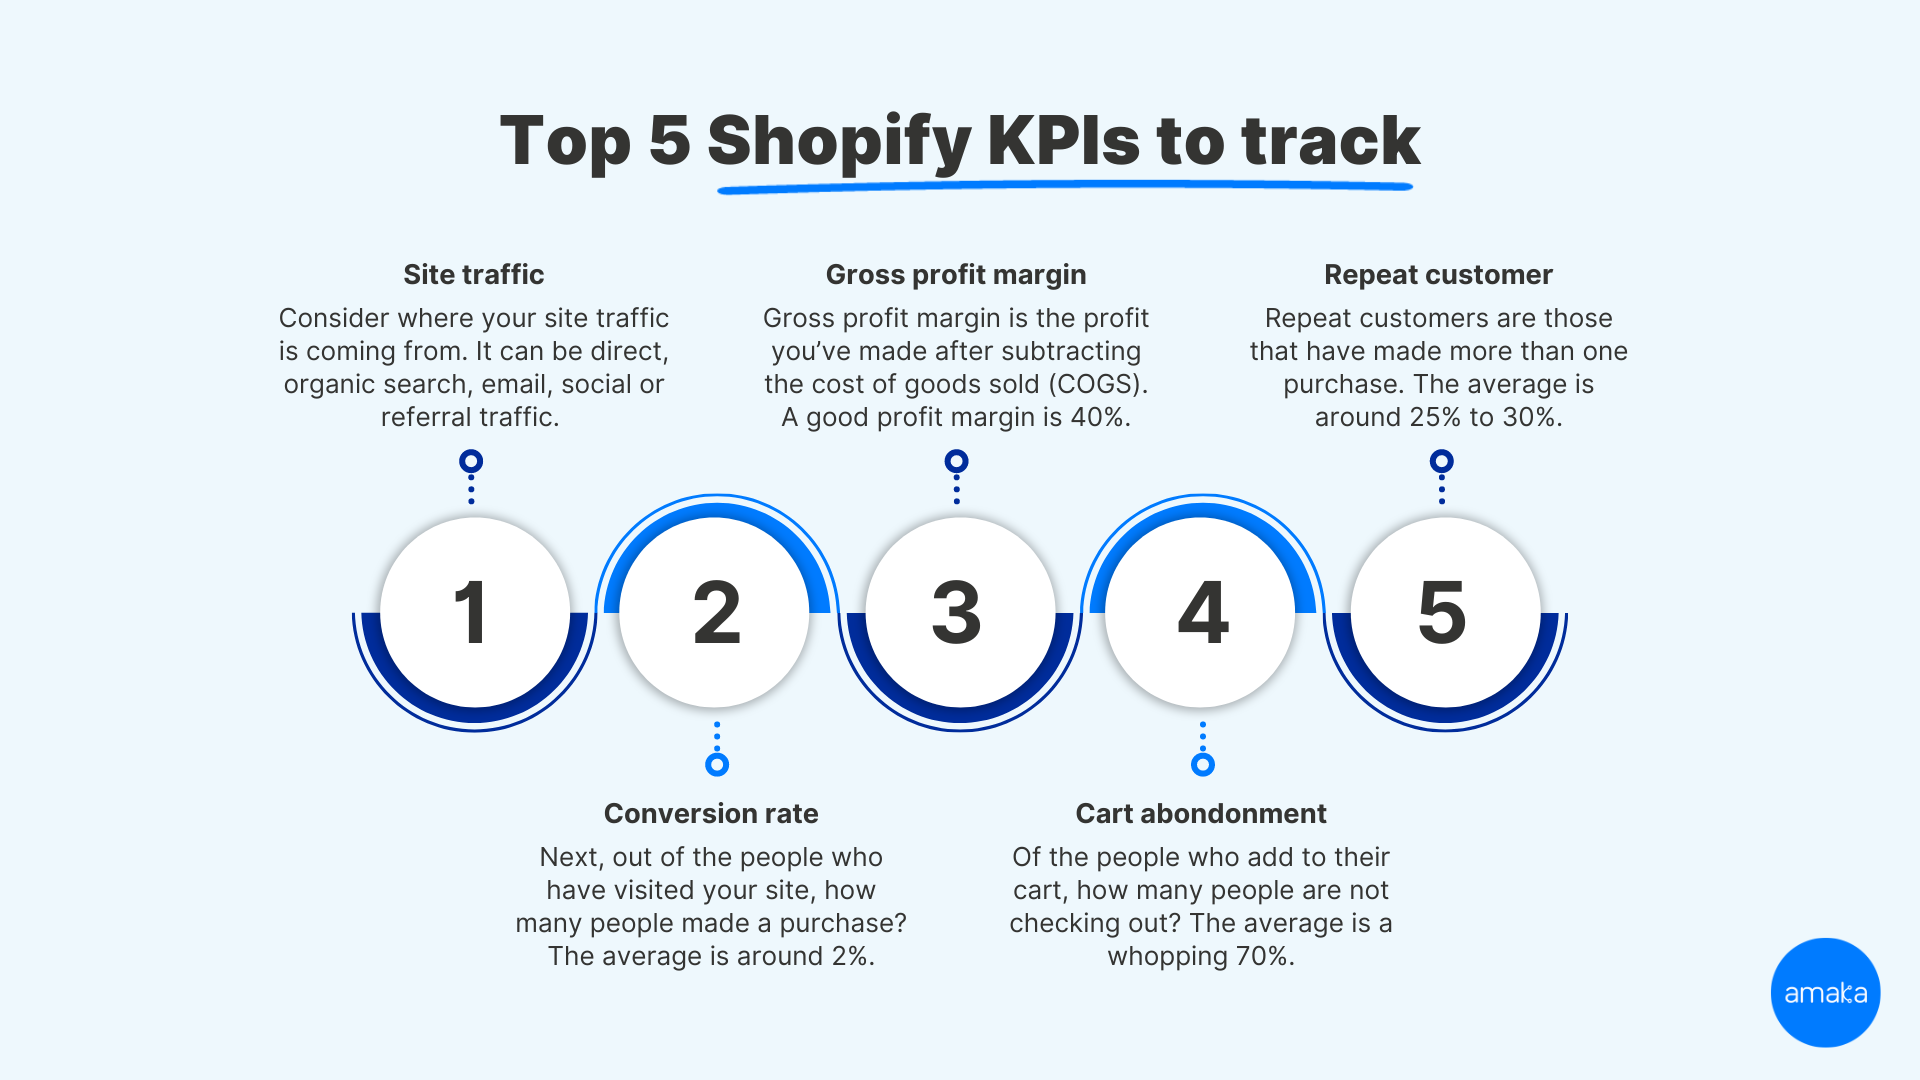 shopify kpis to track infographic